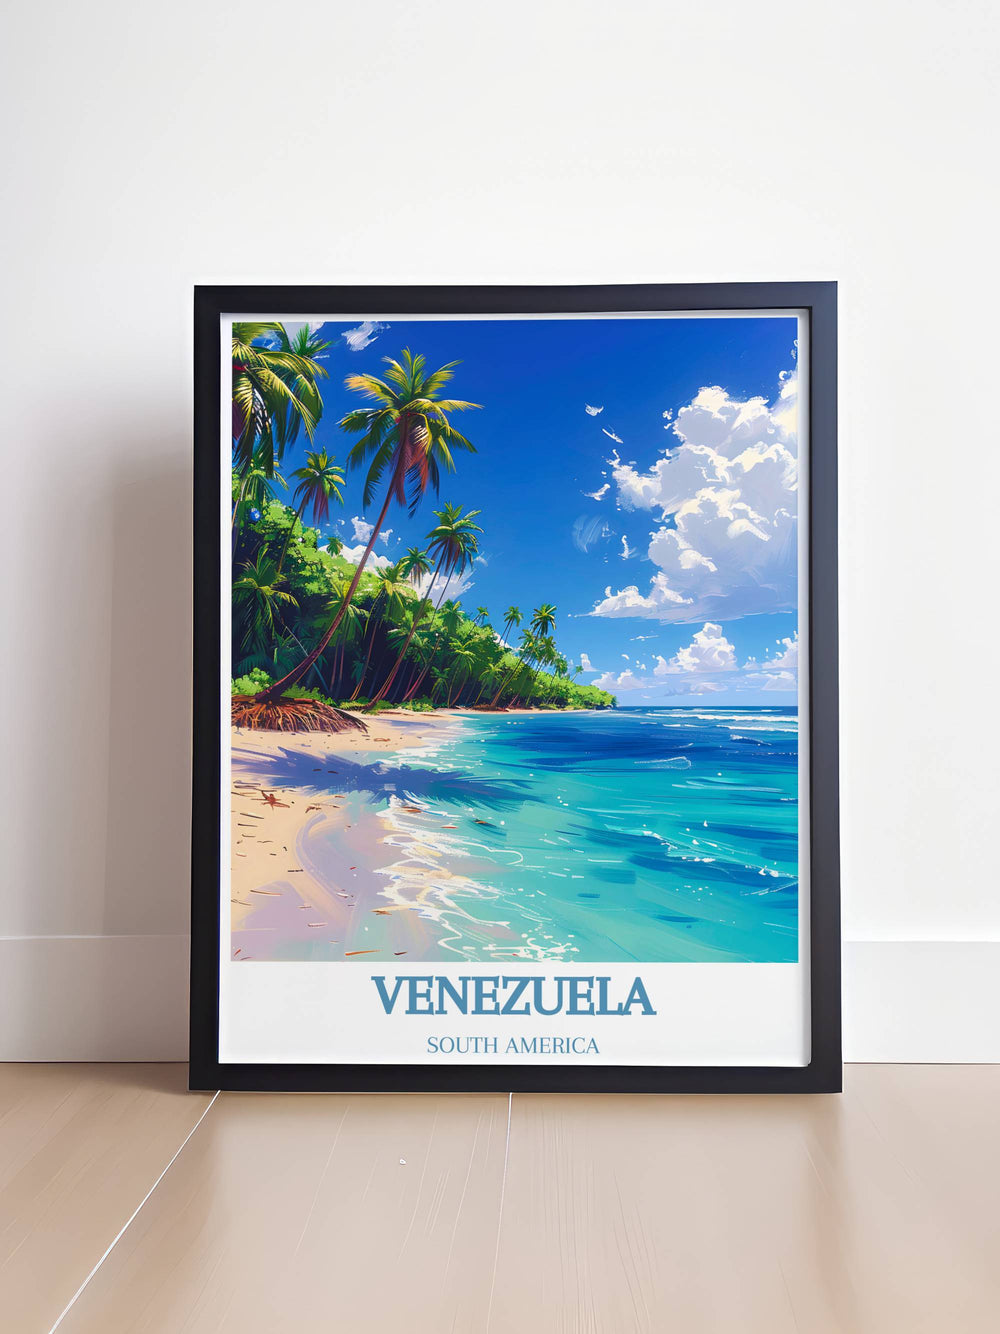 Framed art showcasing Morrocoy National Park with lush mangroves and azure waters, perfect for nature enthusiasts and travel lovers.